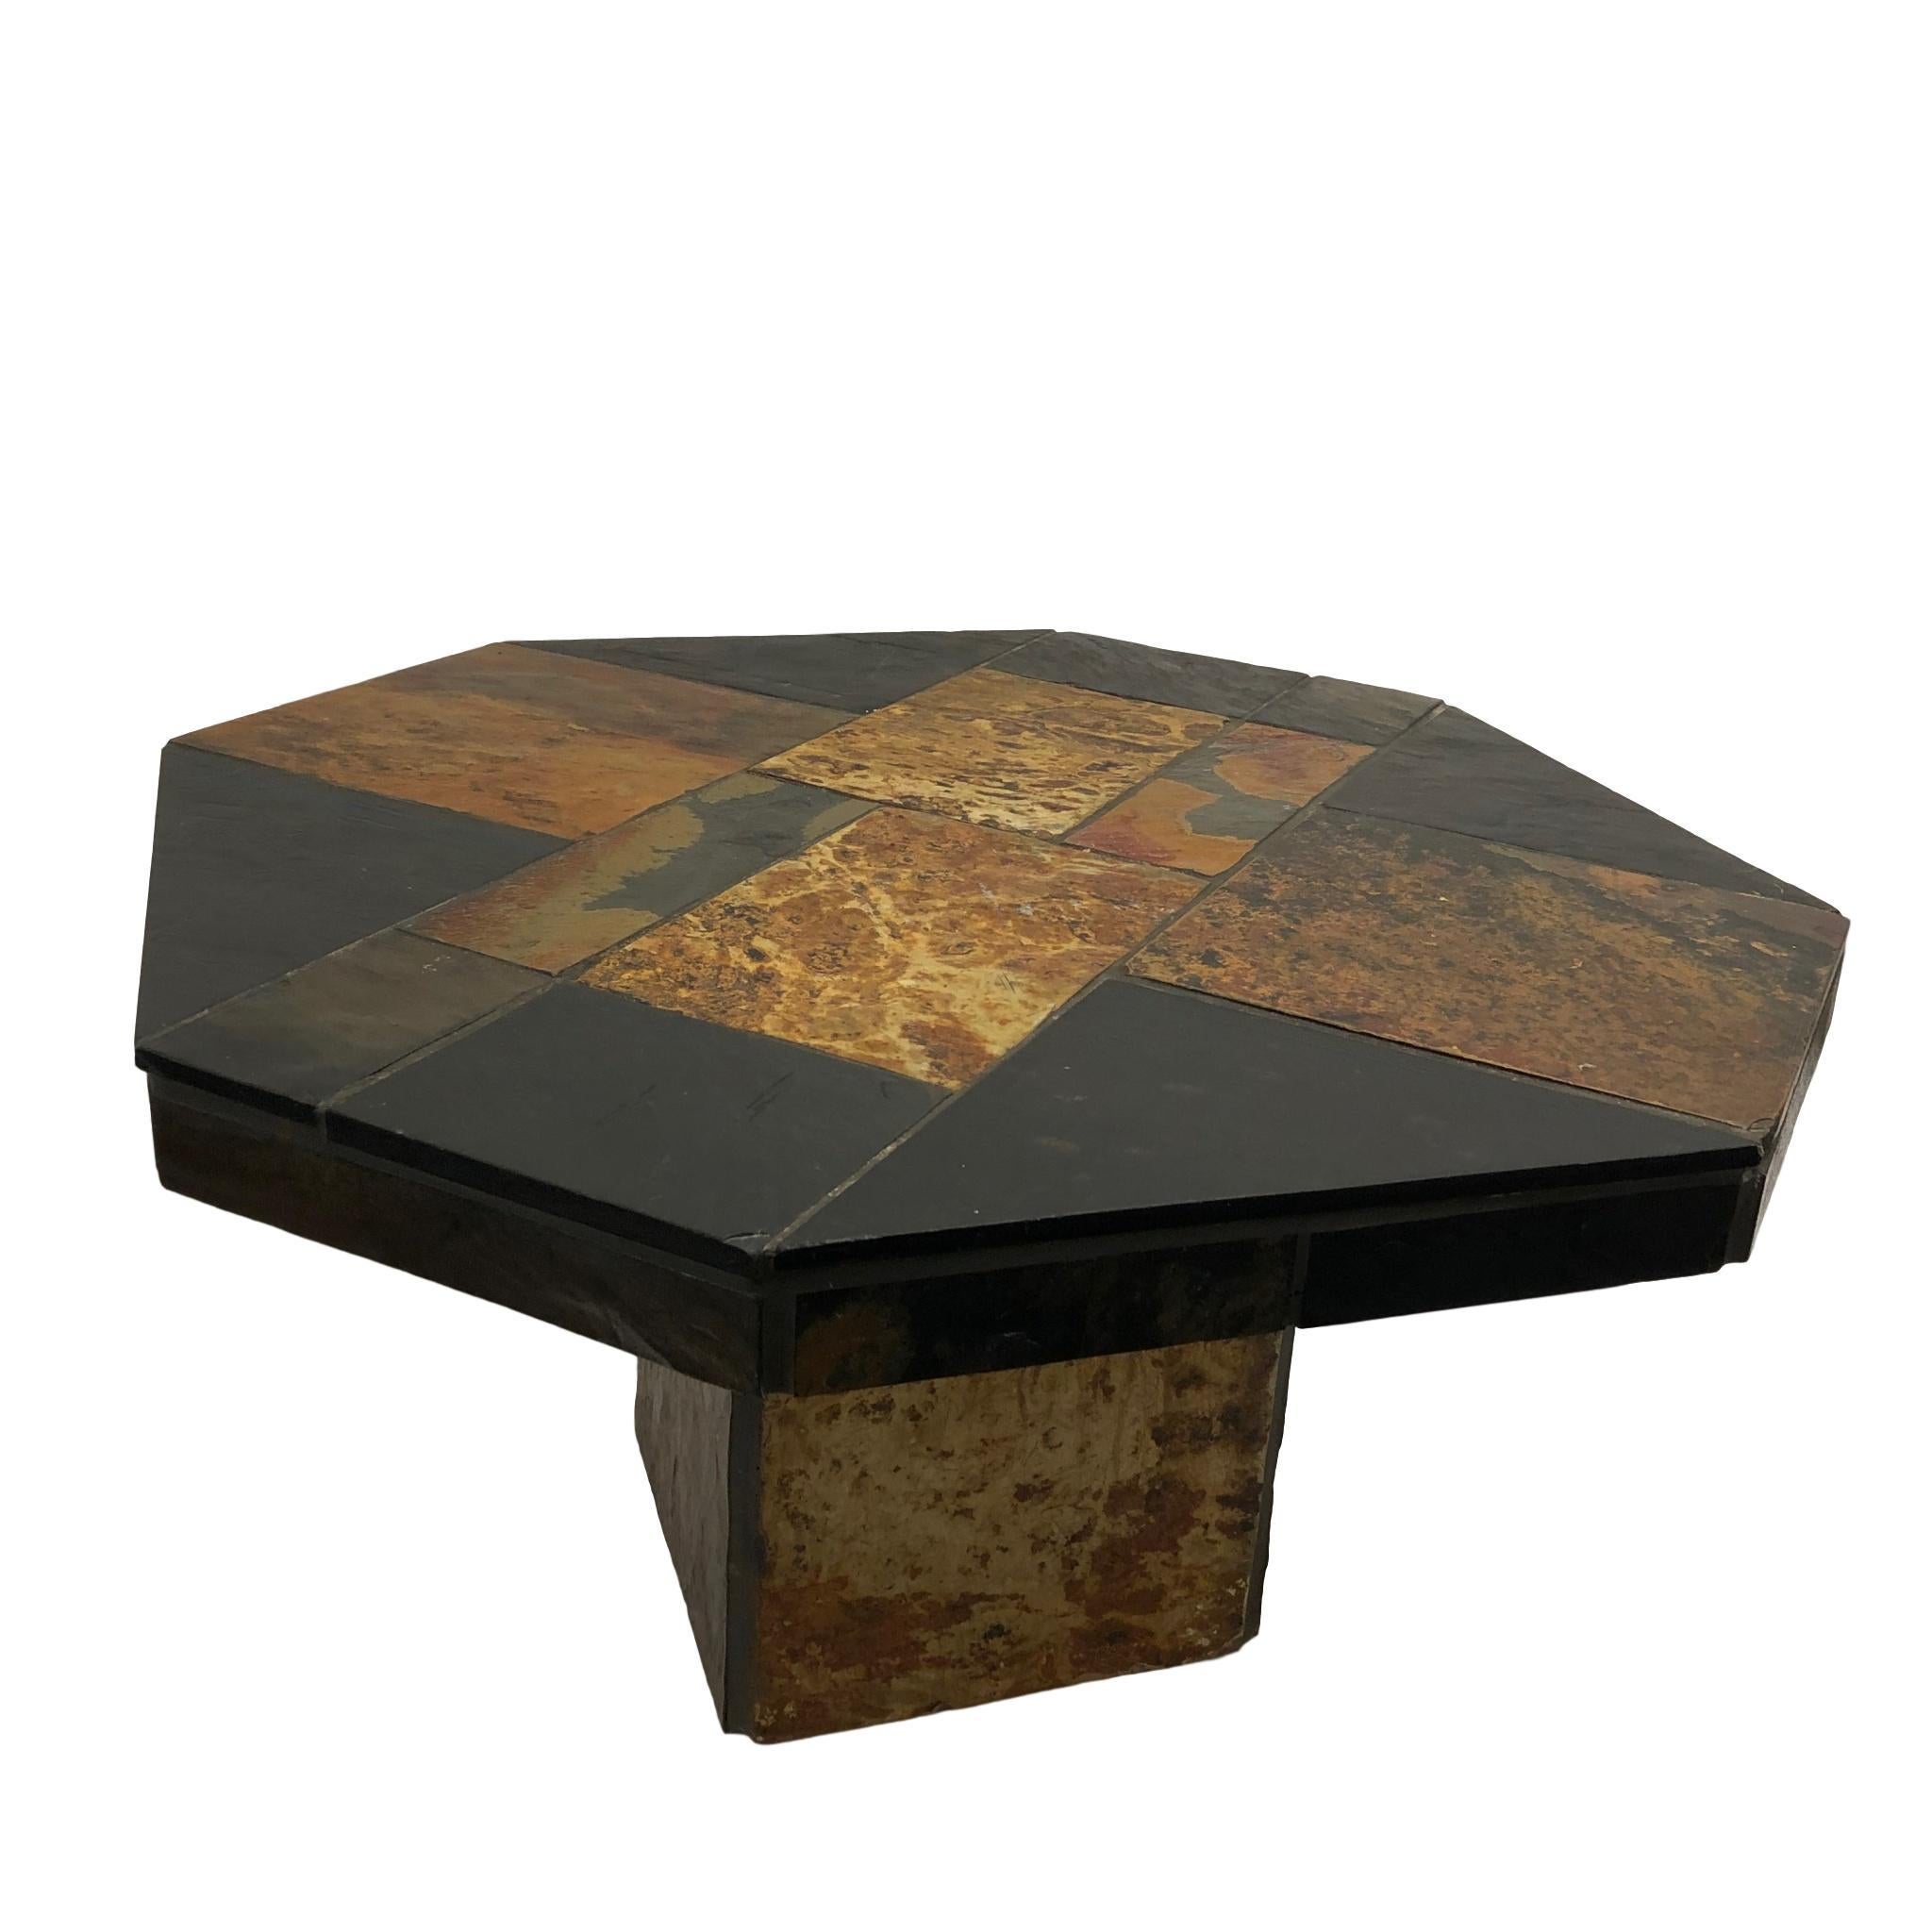 Brutalist Monumental Heavy Coffee Table, Slate, Wood and Concrete, 1960s Dutch For Sale